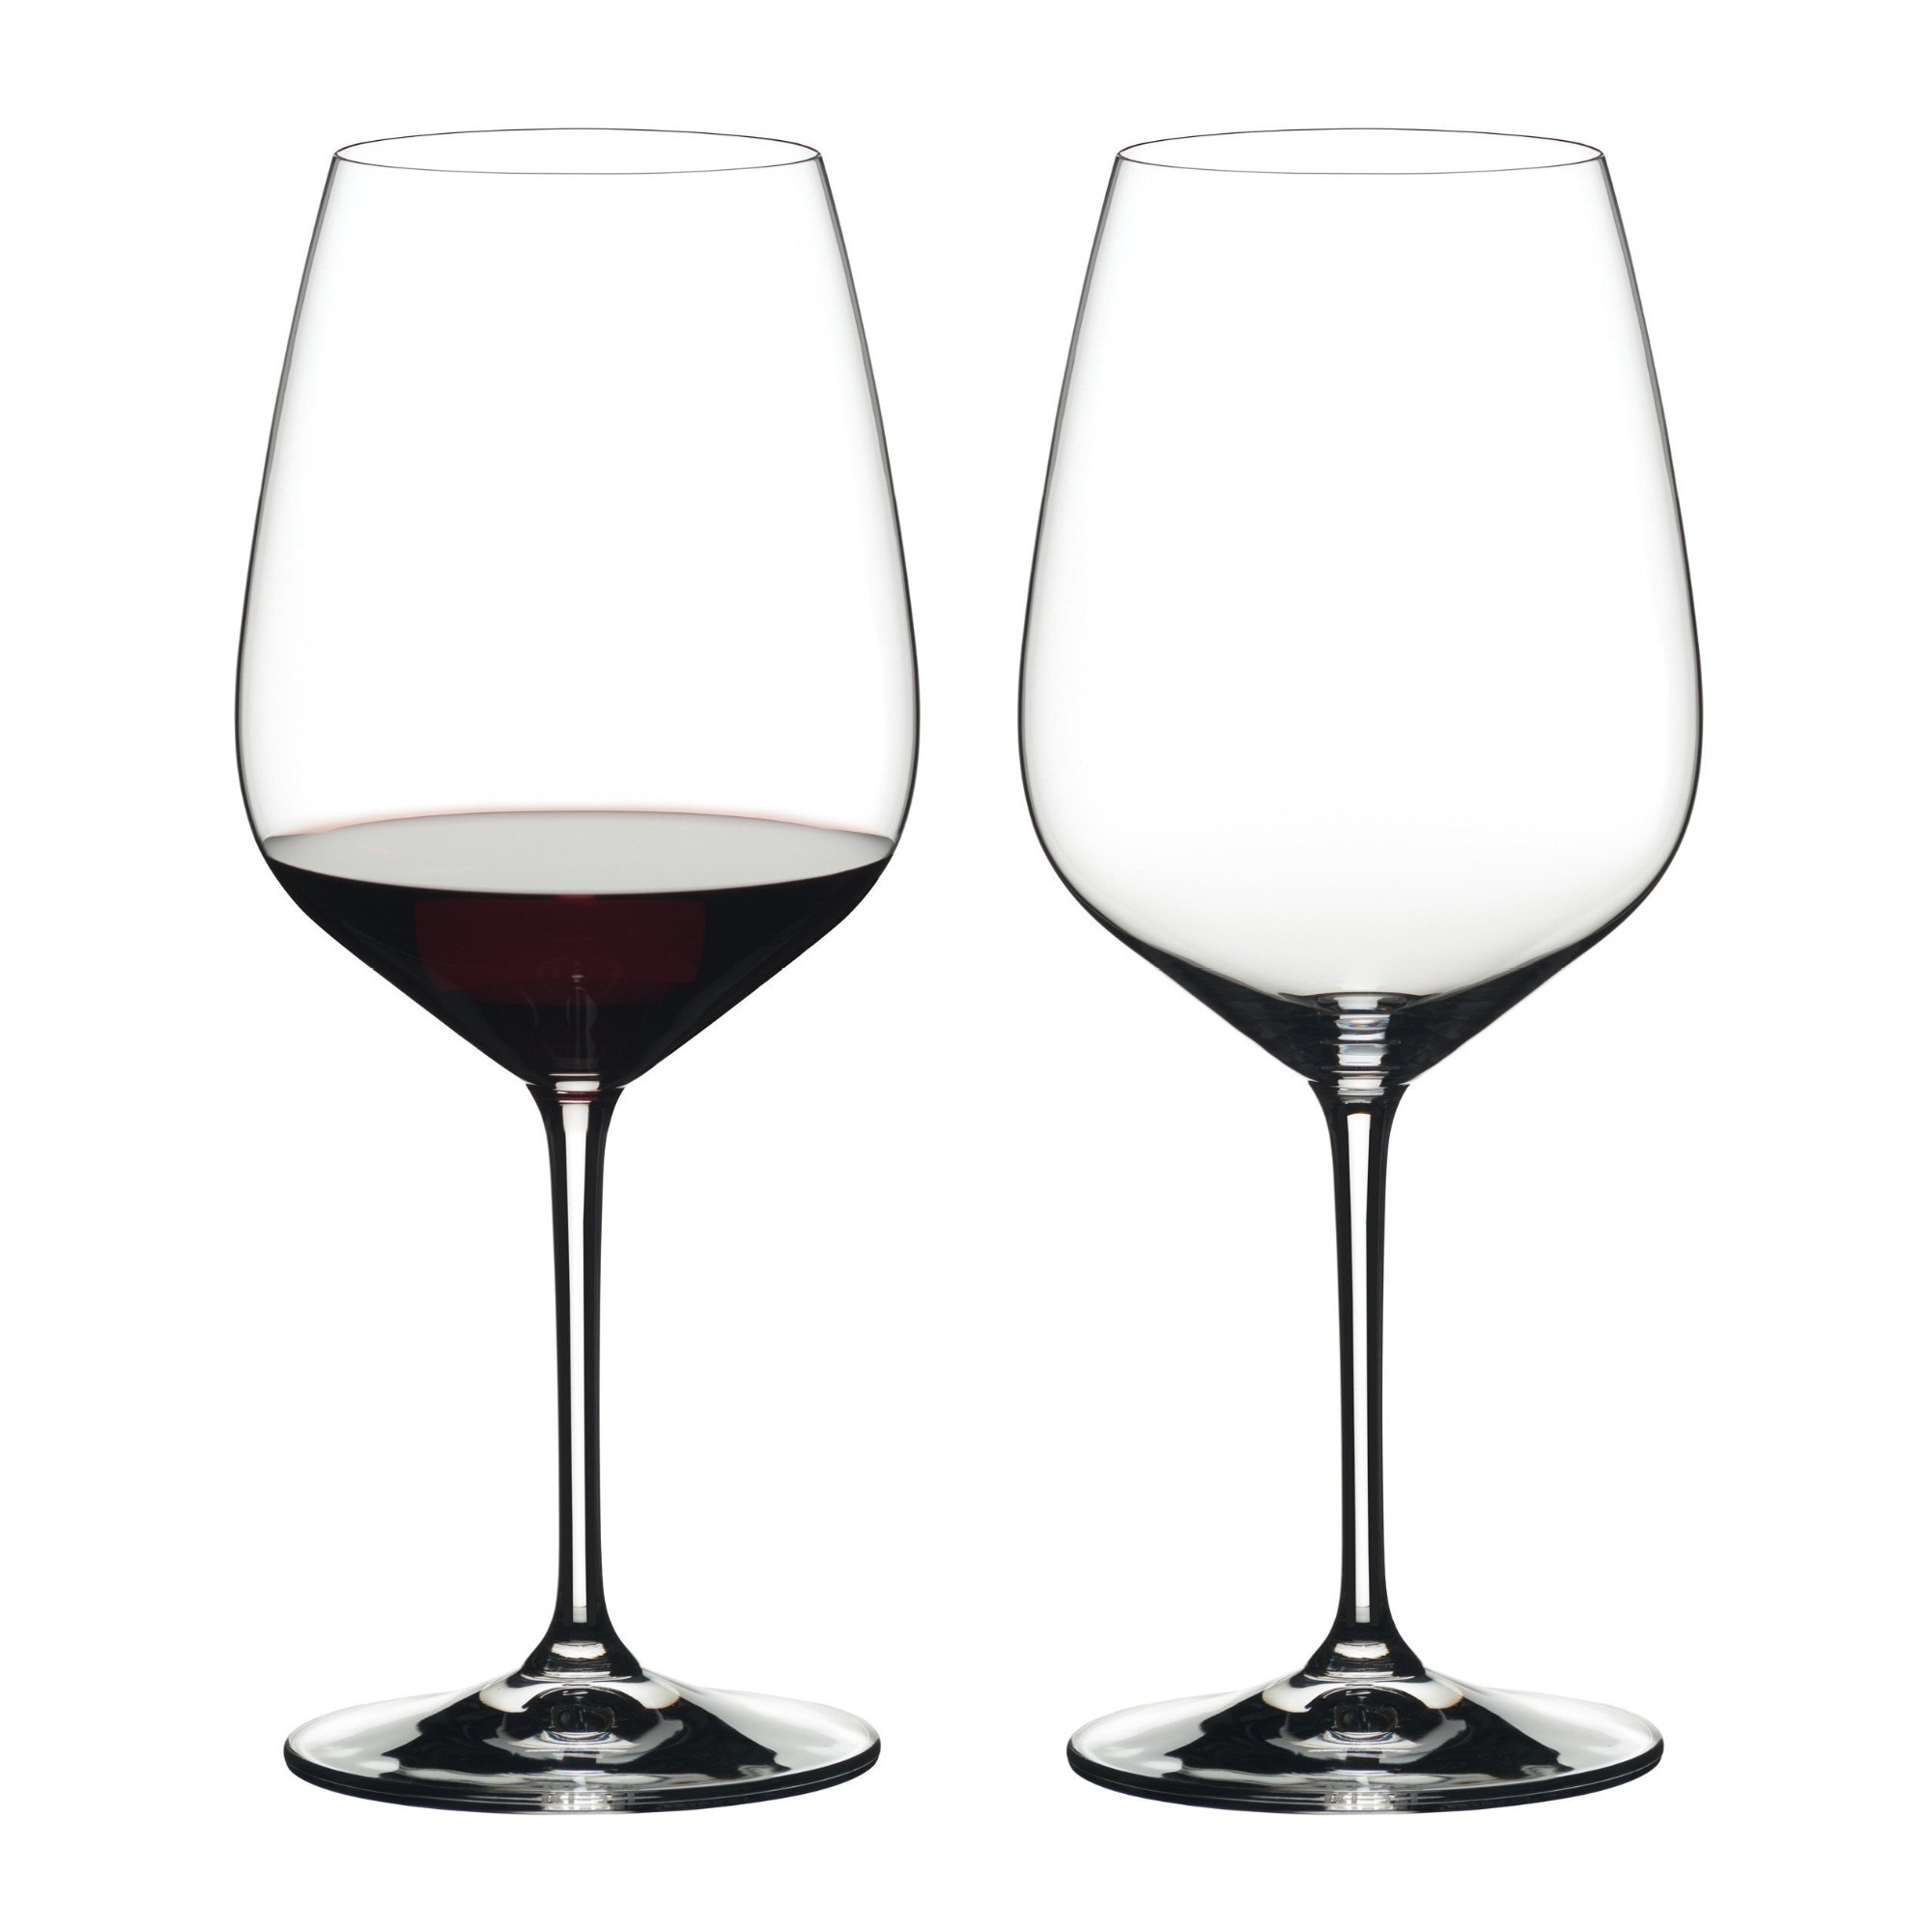 https://ak1.ostkcdn.com/images/products/is/images/direct/aca14380e4d871229296e495fadf6de6726e2687/Riedel-Extreme-Cabernet-Crystal-Wine-Glasses-%282-Pack%29.jpg